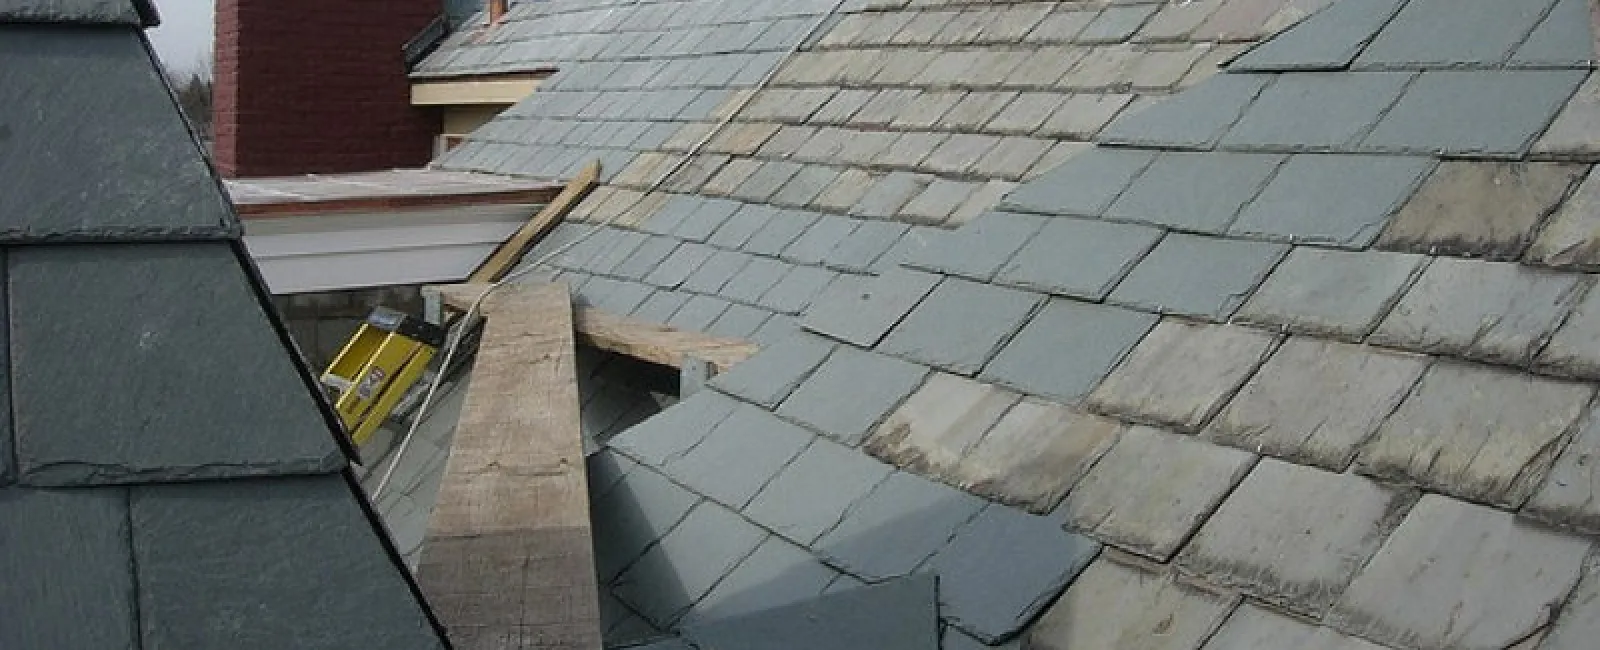 Roof Replacement Atlanta: Picking Out a New Roof